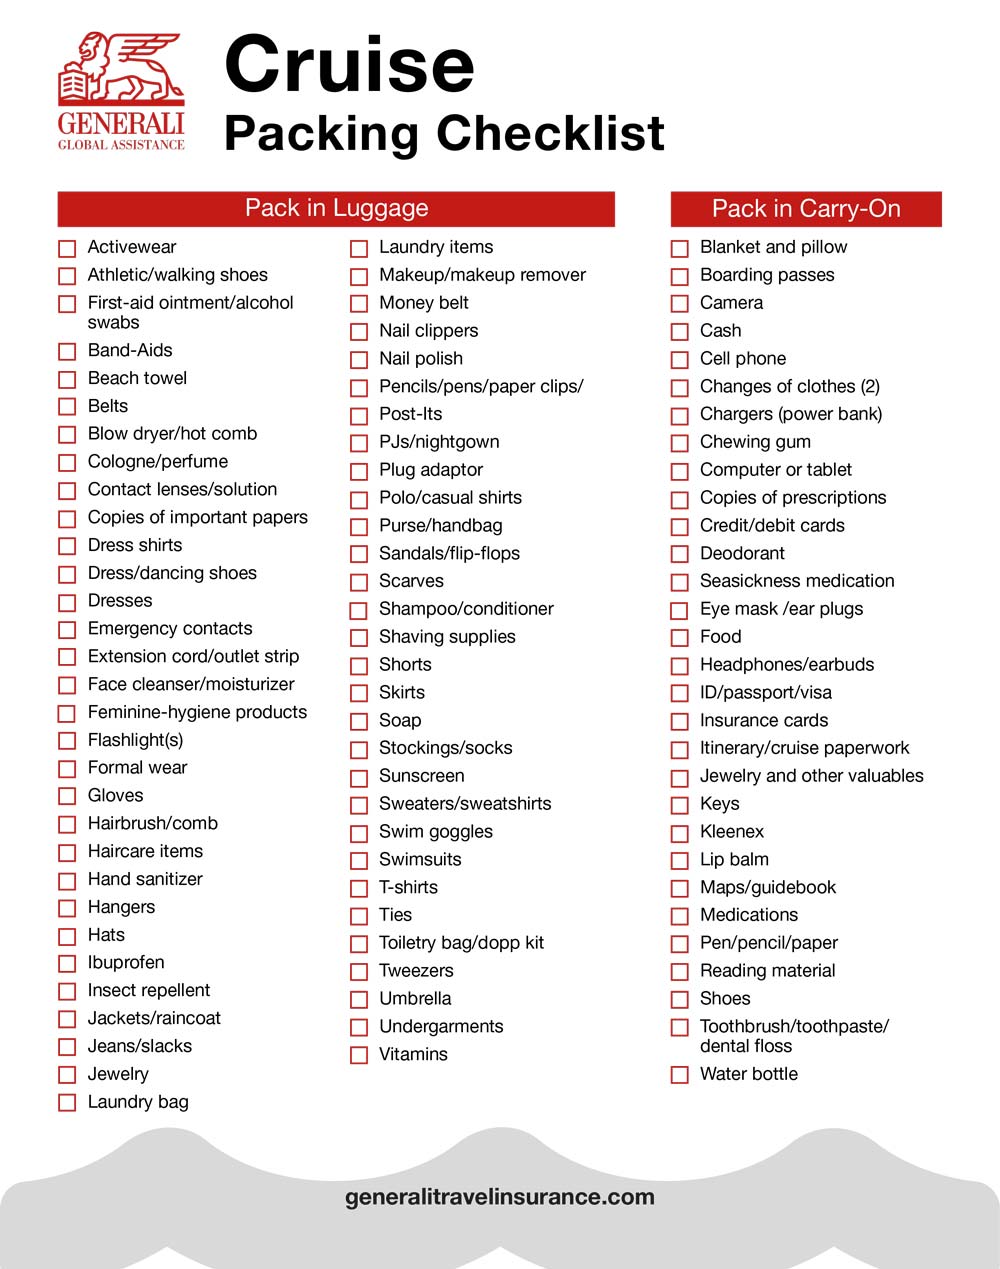 cruise packing checklist to print